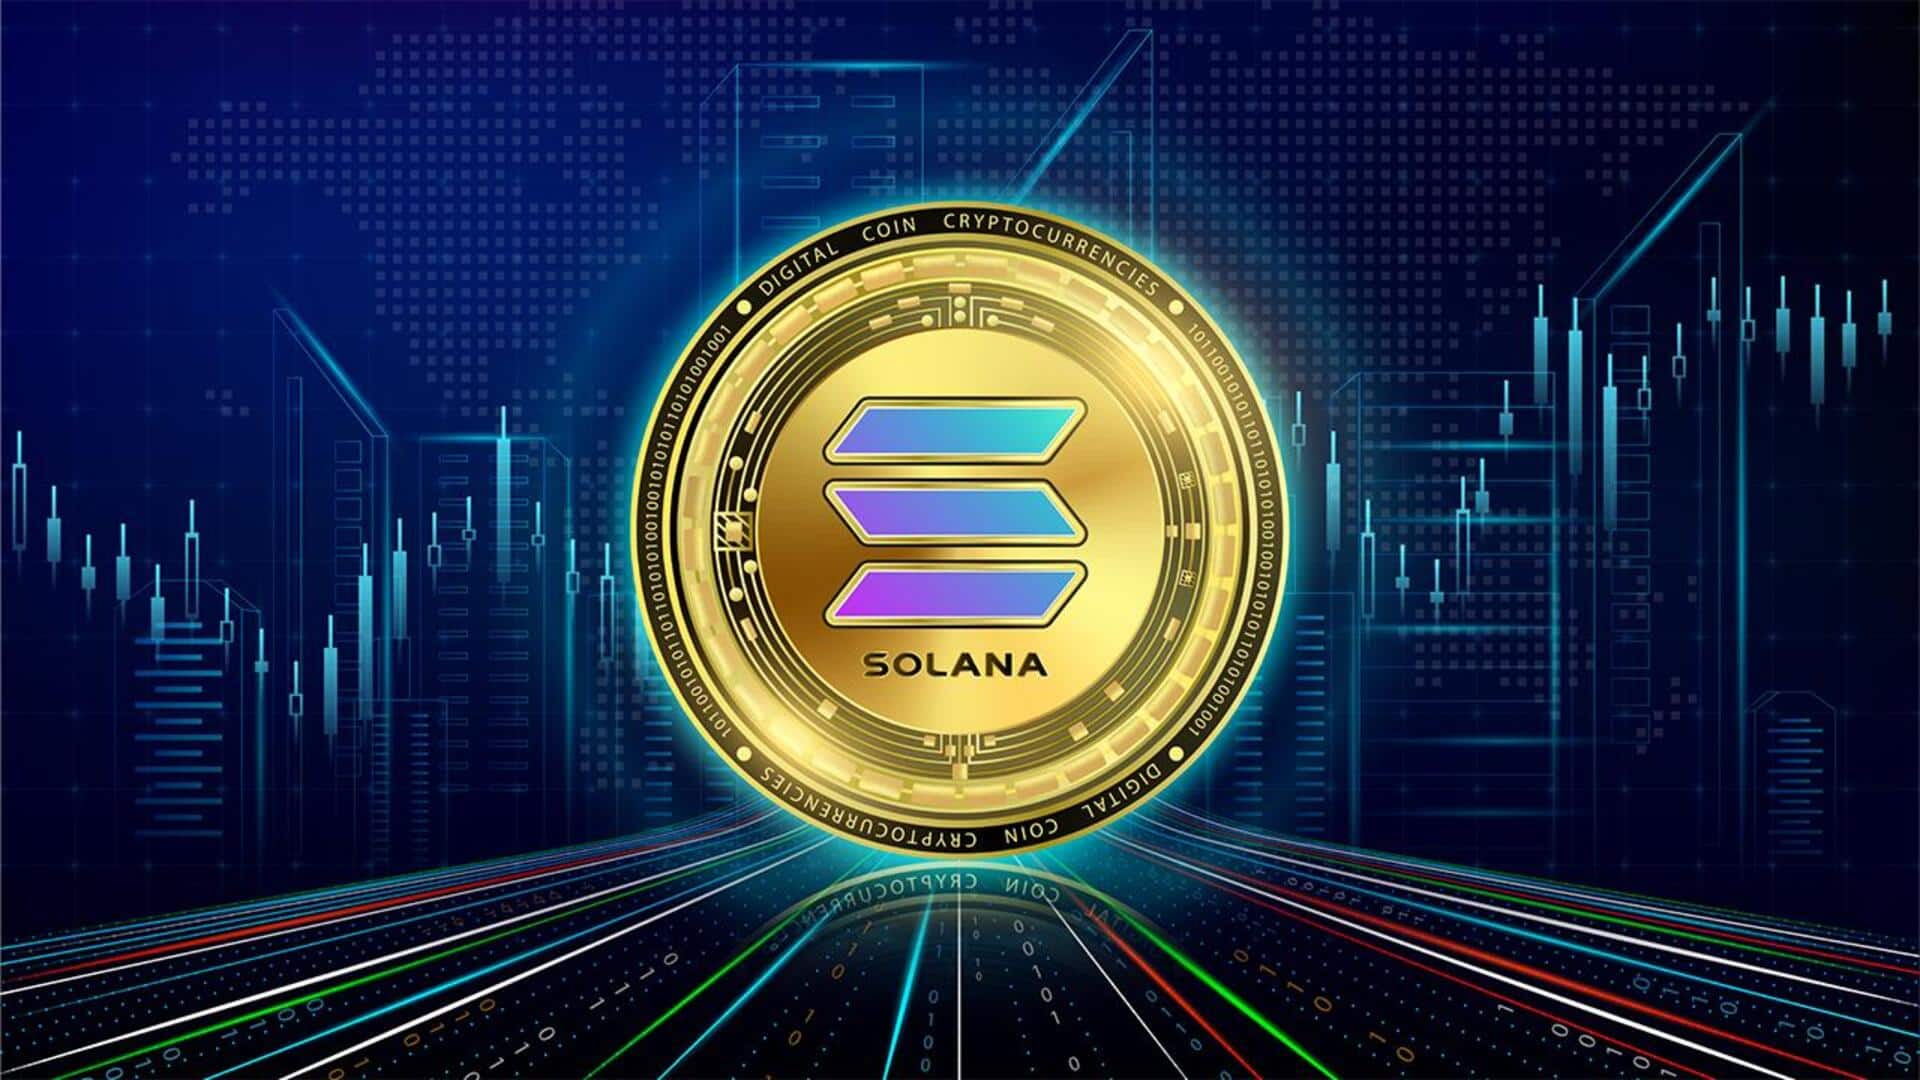 Today's cryptocurrency prices: Check rates of Bitcoin, Ethereum, Dogecoin, Solana